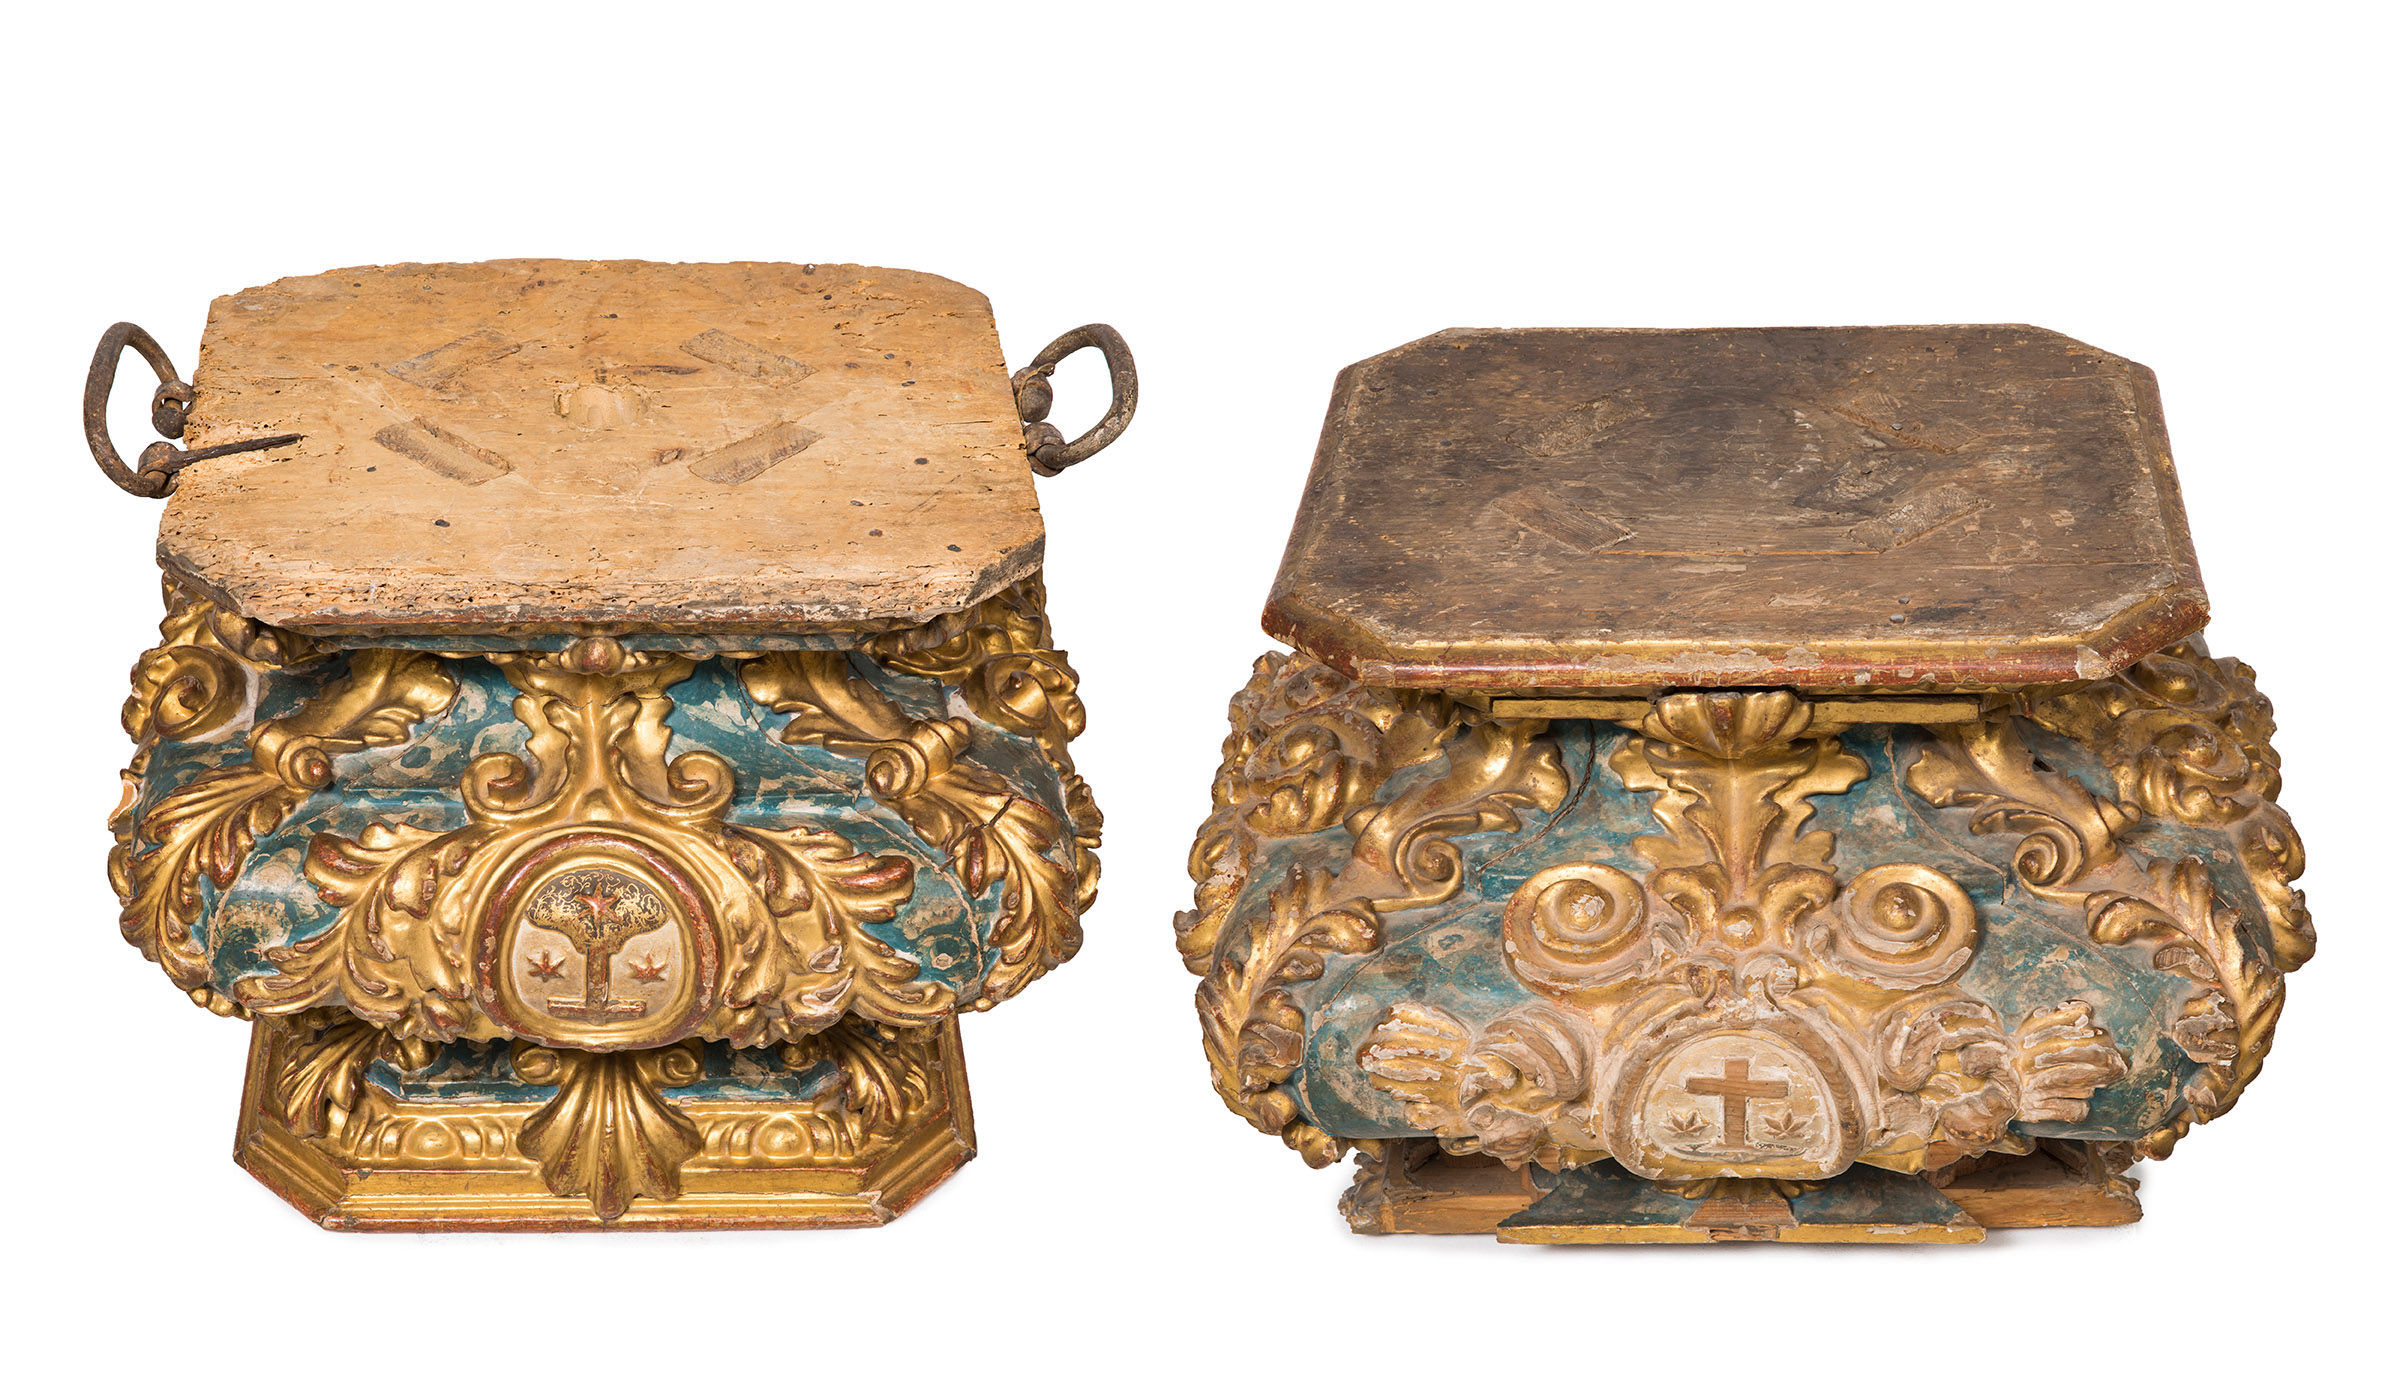 Spanish work, ca. 1700.Pair of pedestals with coats of arms of the Order of Carmel.Carved and - Image 5 of 7